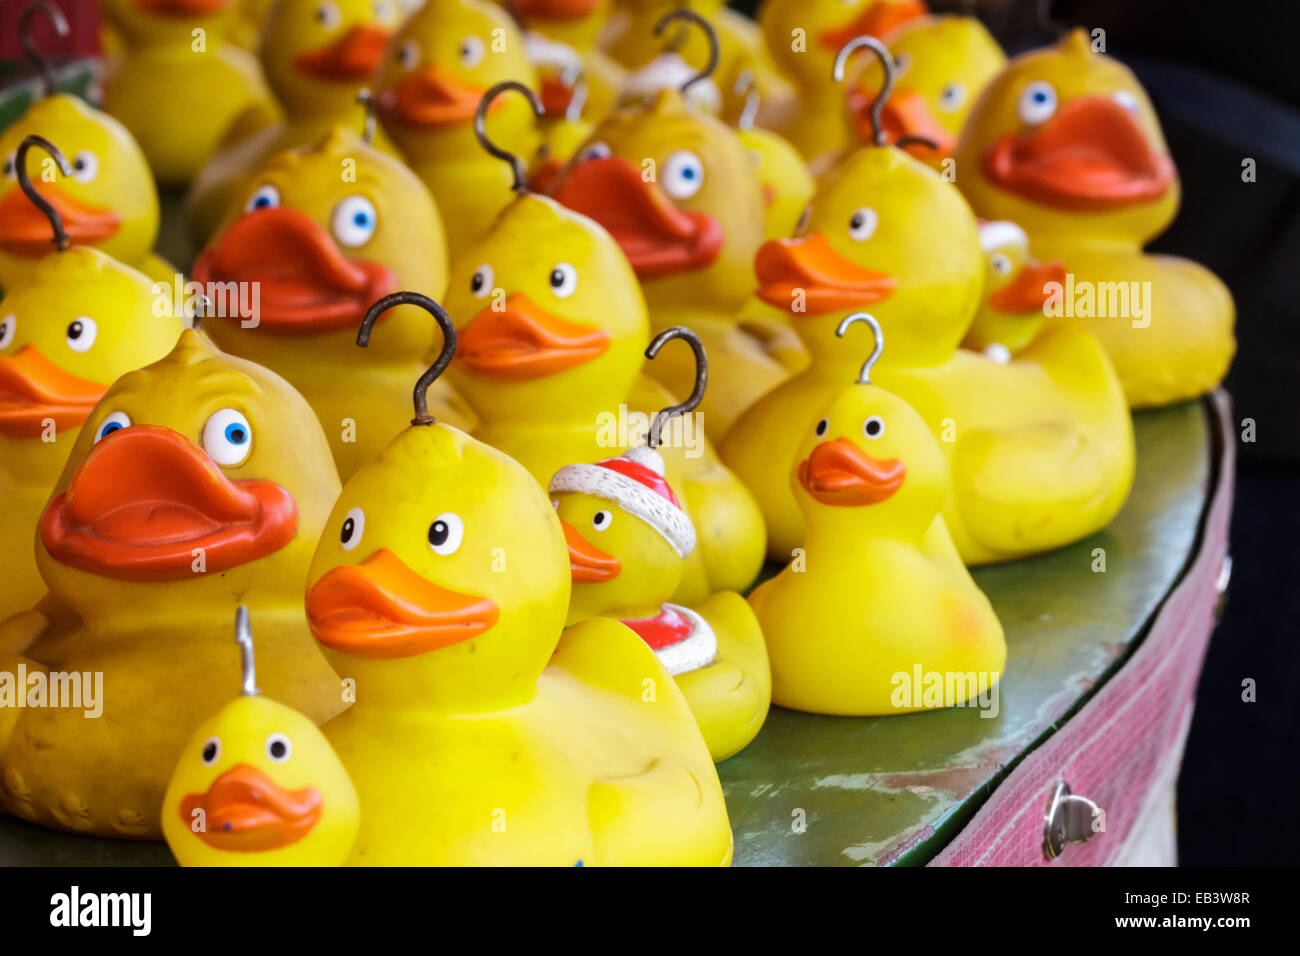 Hook-a-duck can be found at the fairground aimed at children. Stock Photo